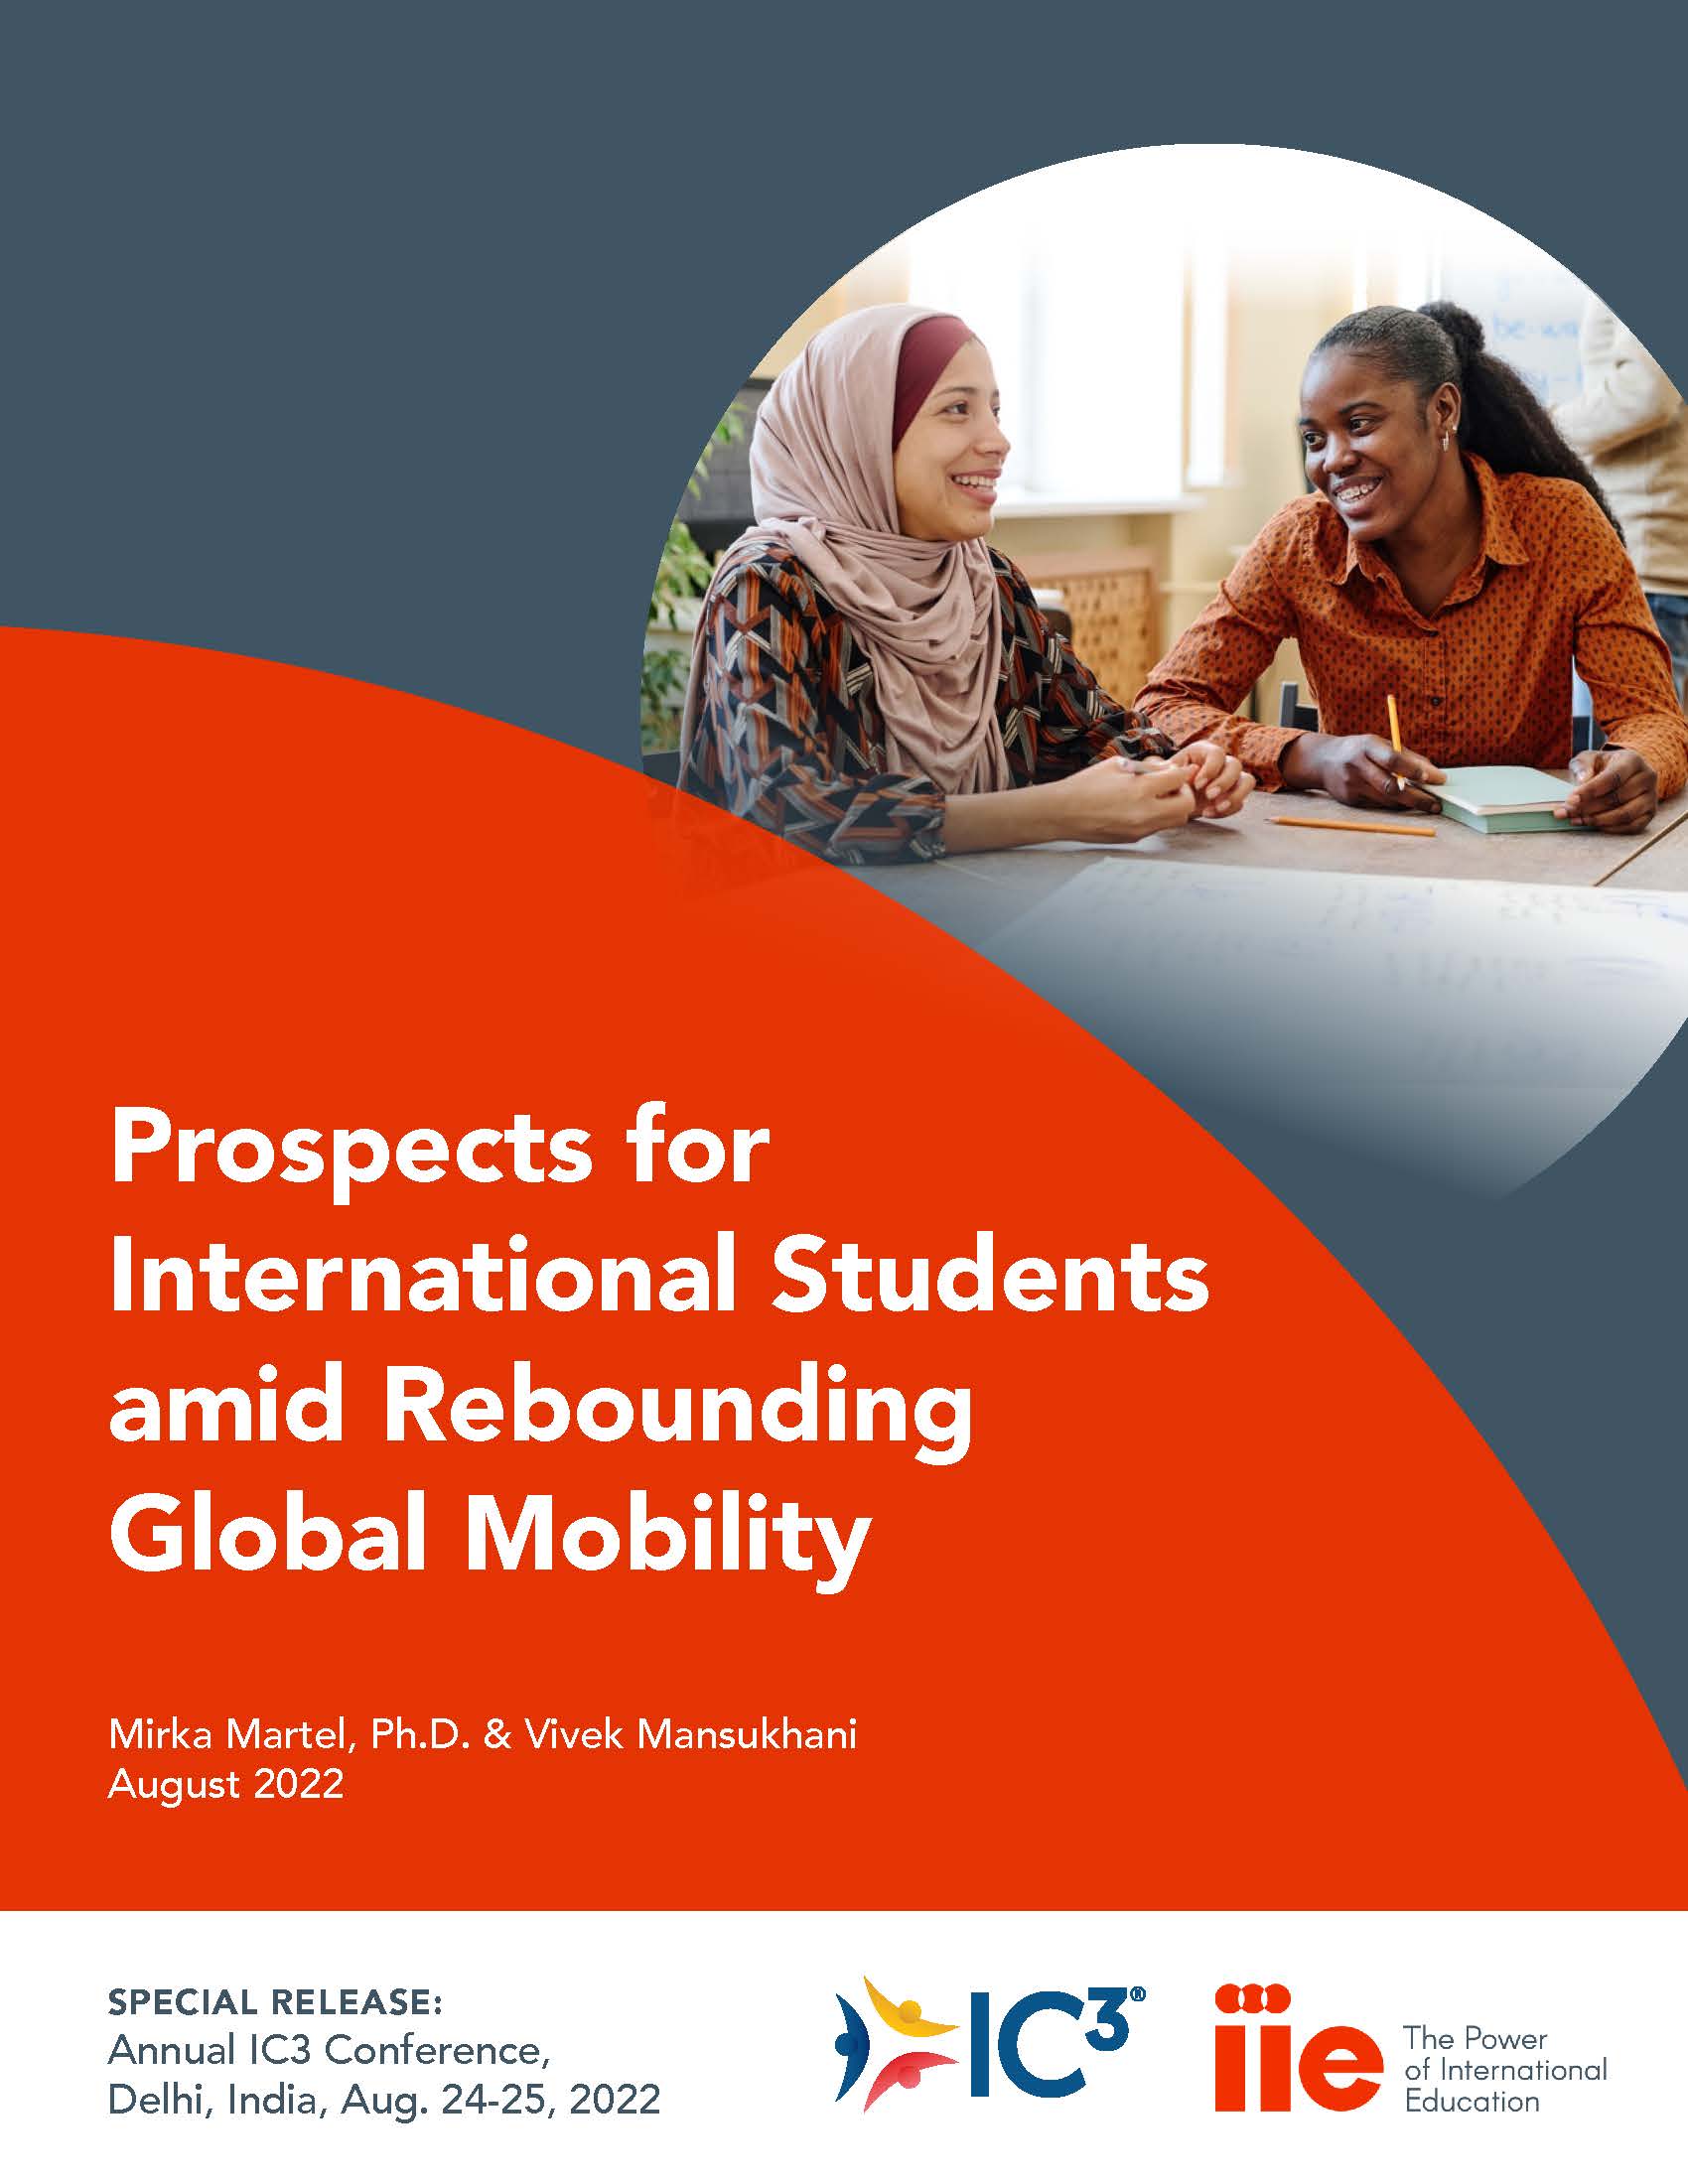 Cover of IC3 - IIE publication, "Prospects for International Students amid Rebounding Global Mobility"